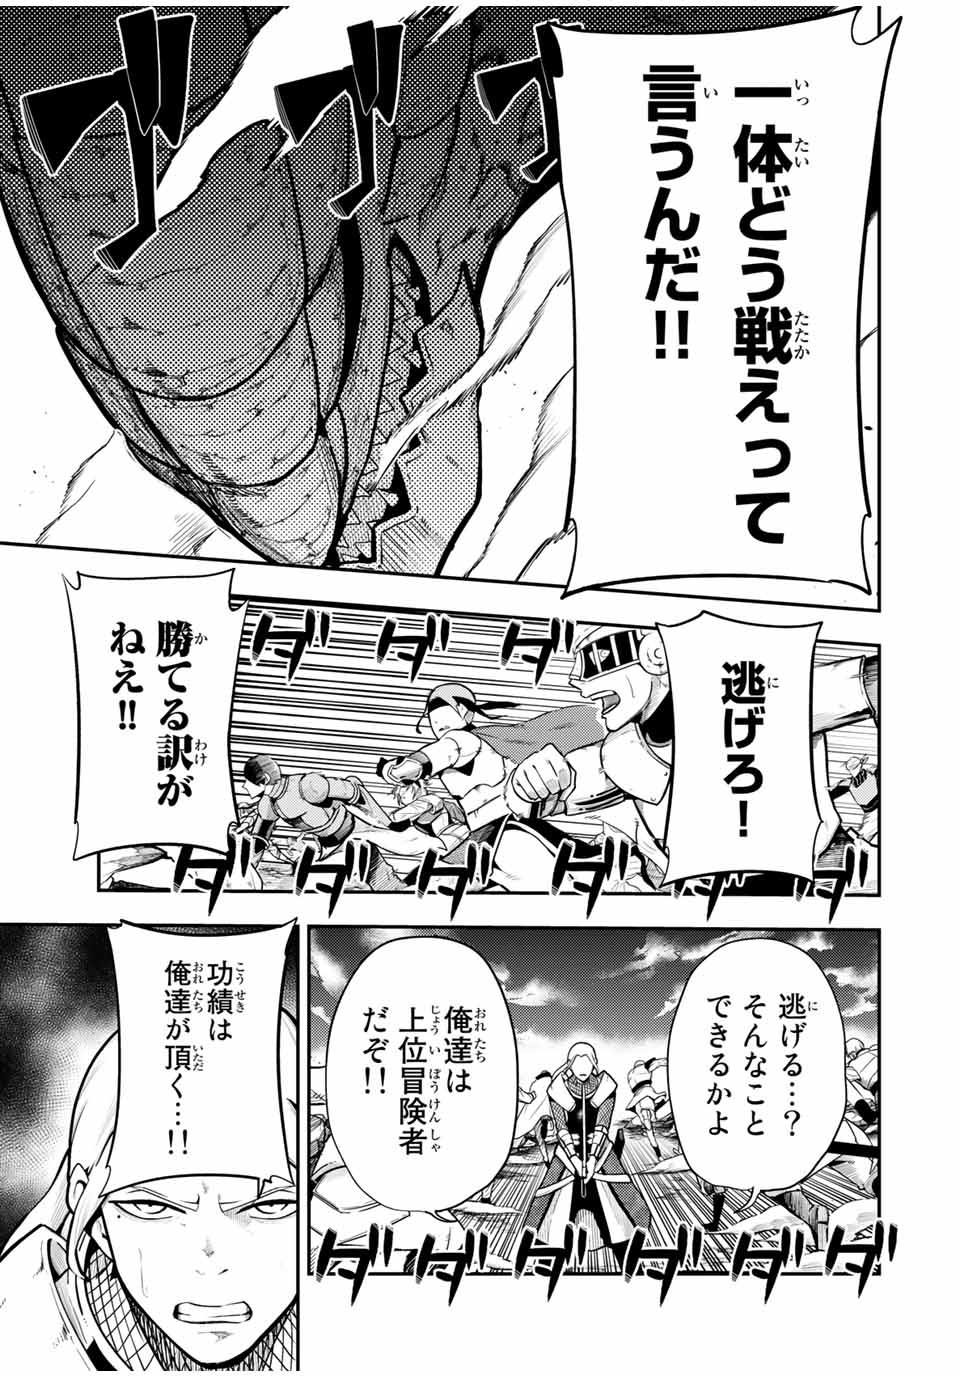 the strongest former prince-; 奴隷転生 ～その奴隷、最強の元王子につき～ 第57話 - Page 11